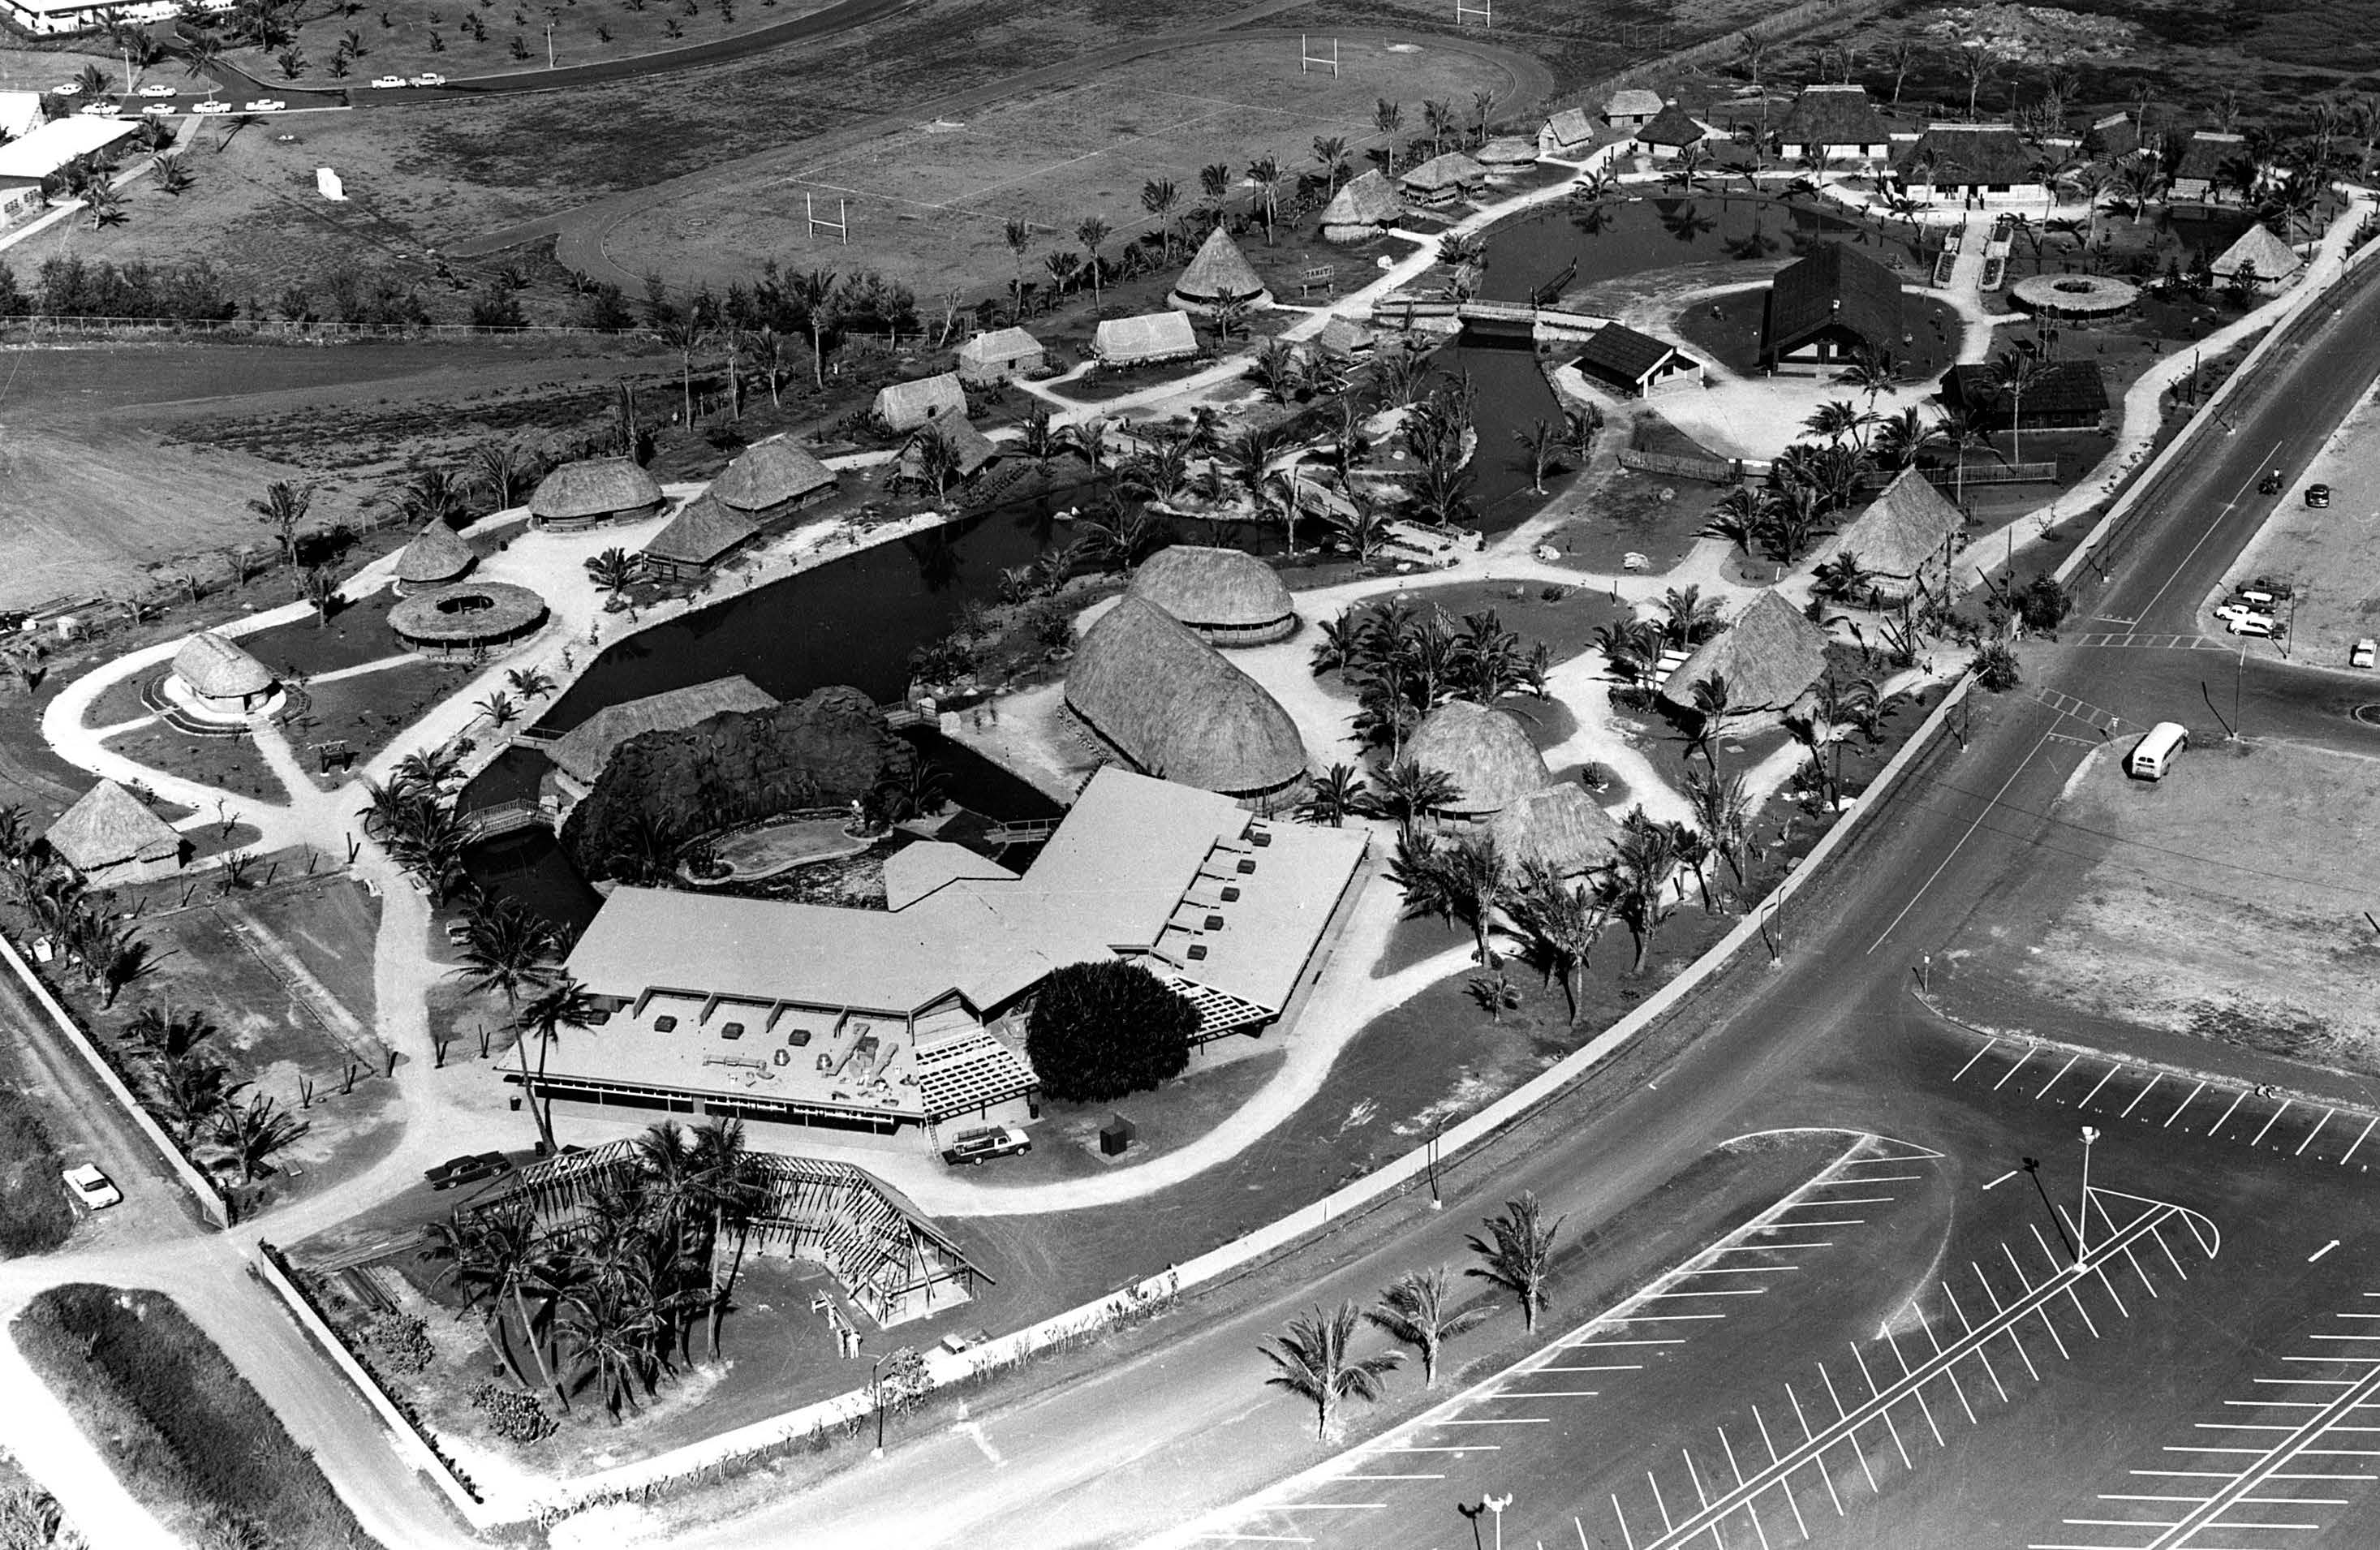 Above and previous page: Remarkably, the PCC has welcomed tens of millions of visitors to Lāʻie over the years, and millions of those visitors have found their way to the temple grounds. Photos courtesy of BYU–Hawaii Archives.